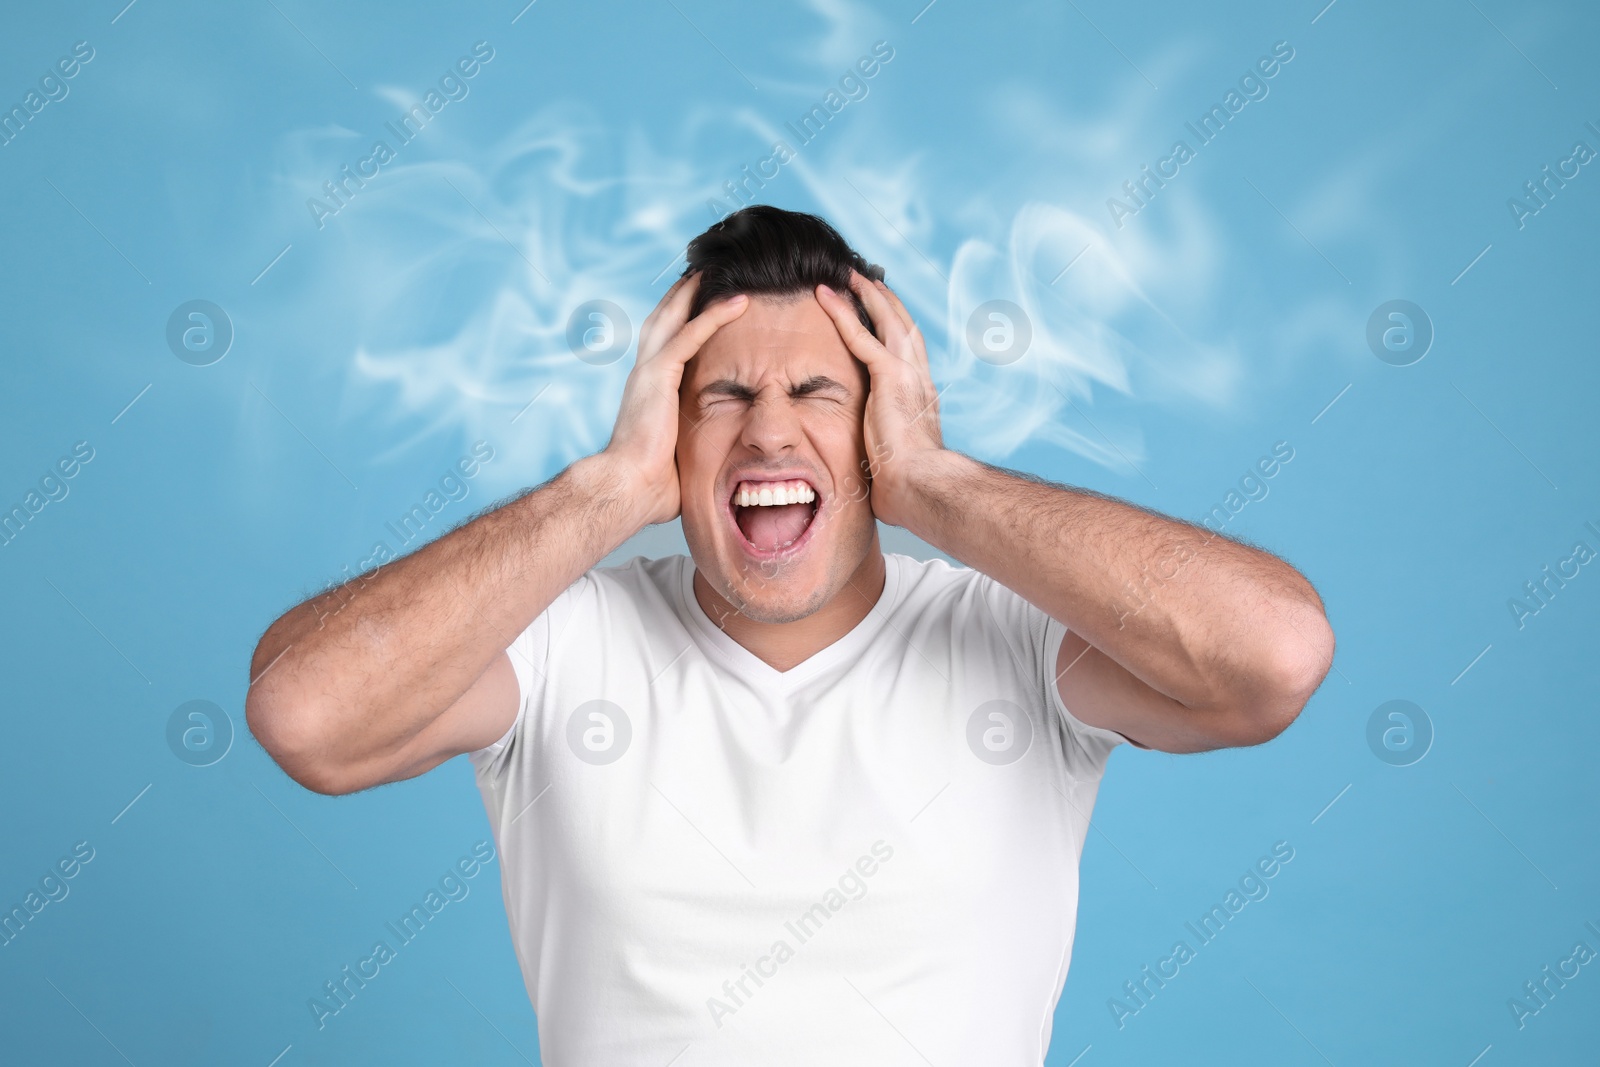 Image of Stressed and upset young man on light blue background